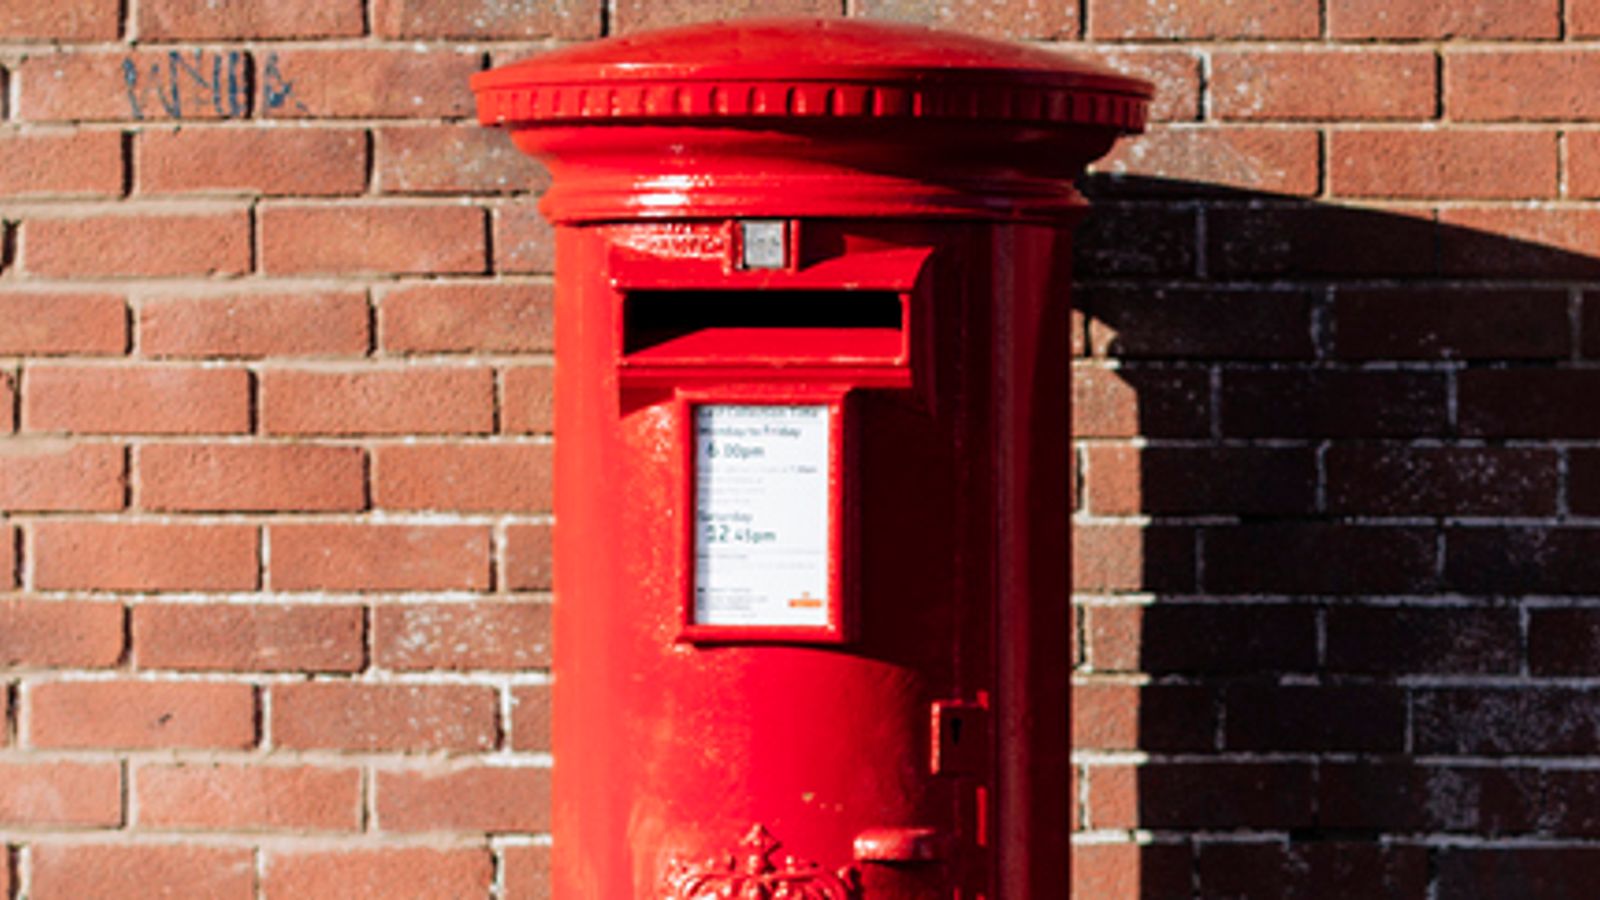 Royal Mail 'minded' to accept £3.5bn takeover proposal by Czech billionaire Daniel Kretinsky